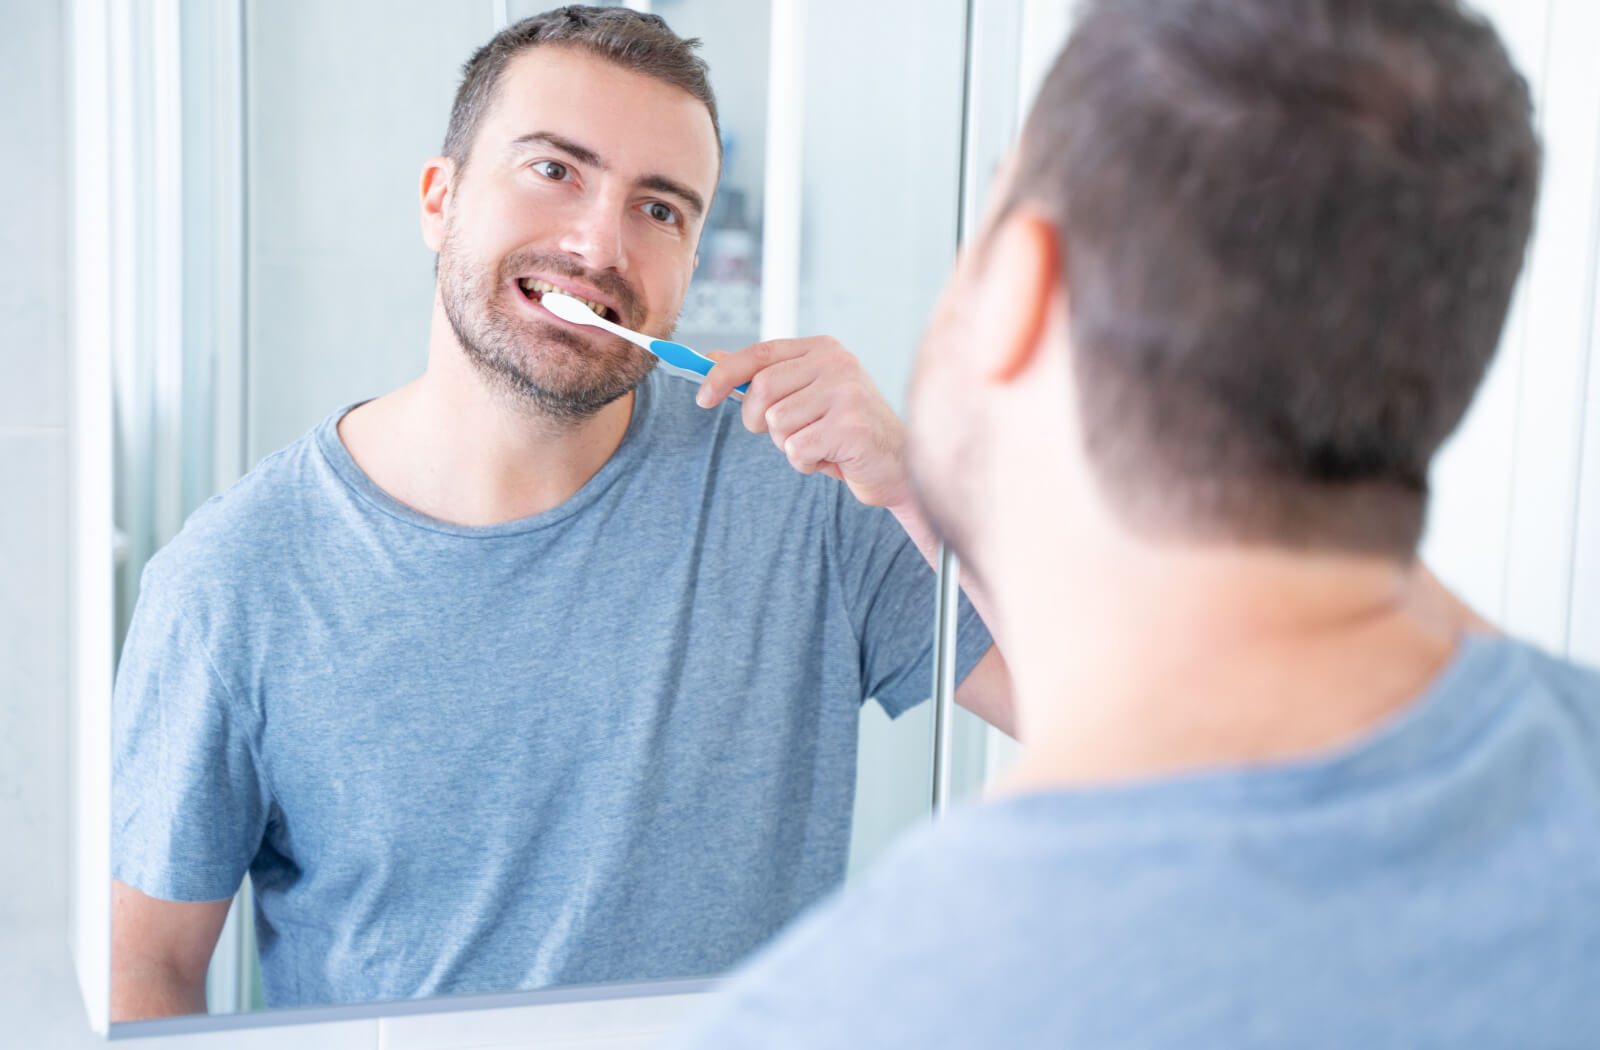 A man wearing a blue shirt with a toothbrush in his mouth smiling as he cleans his teeth.